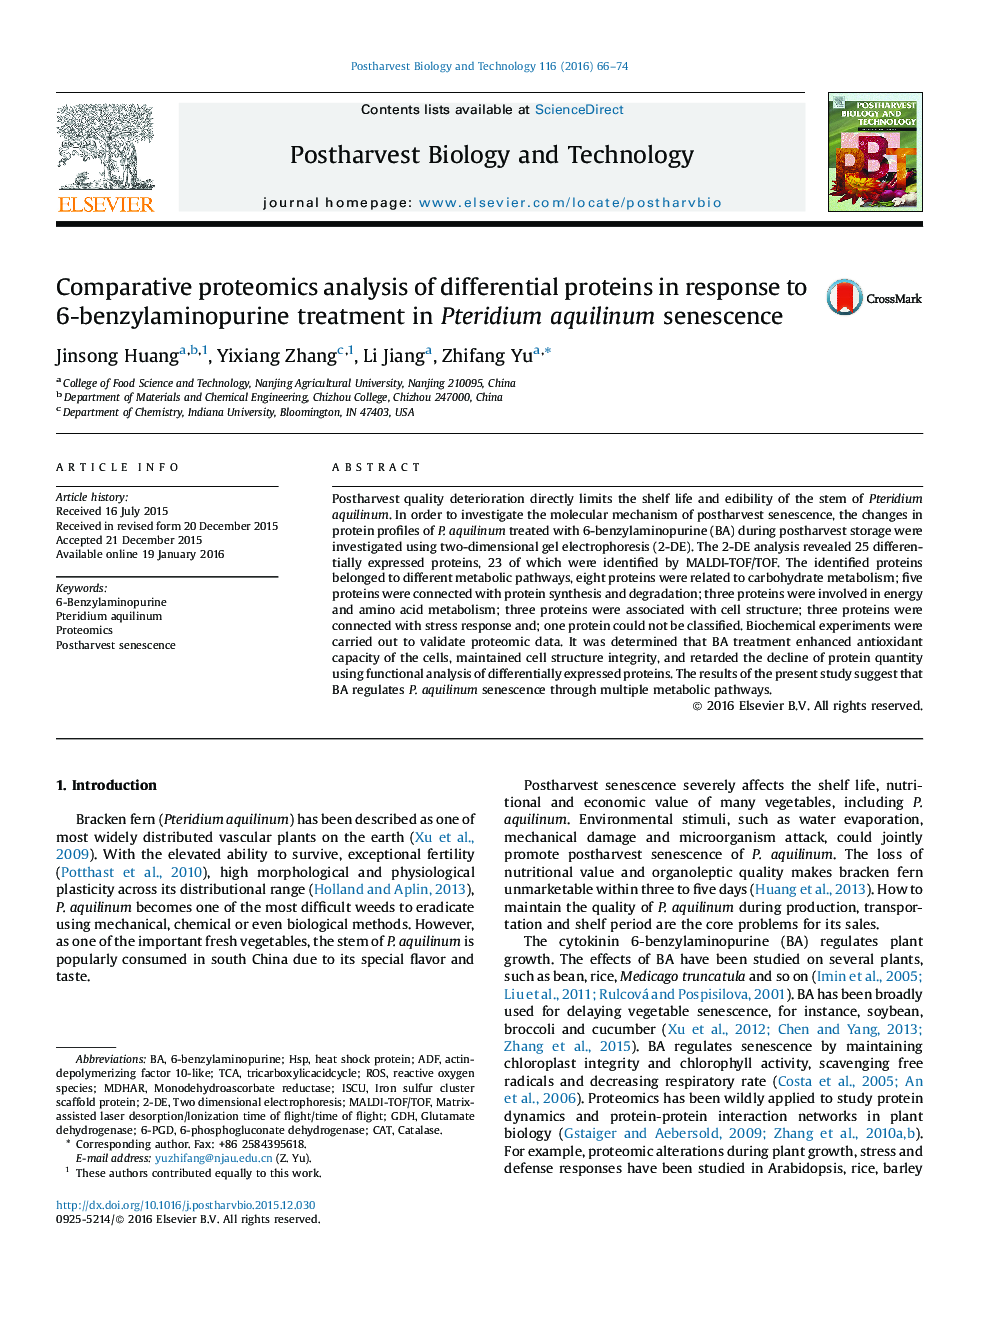 Comparative proteomics analysis of differential proteins in response to 6-benzylaminopurine treatment in Pteridium aquilinum senescence